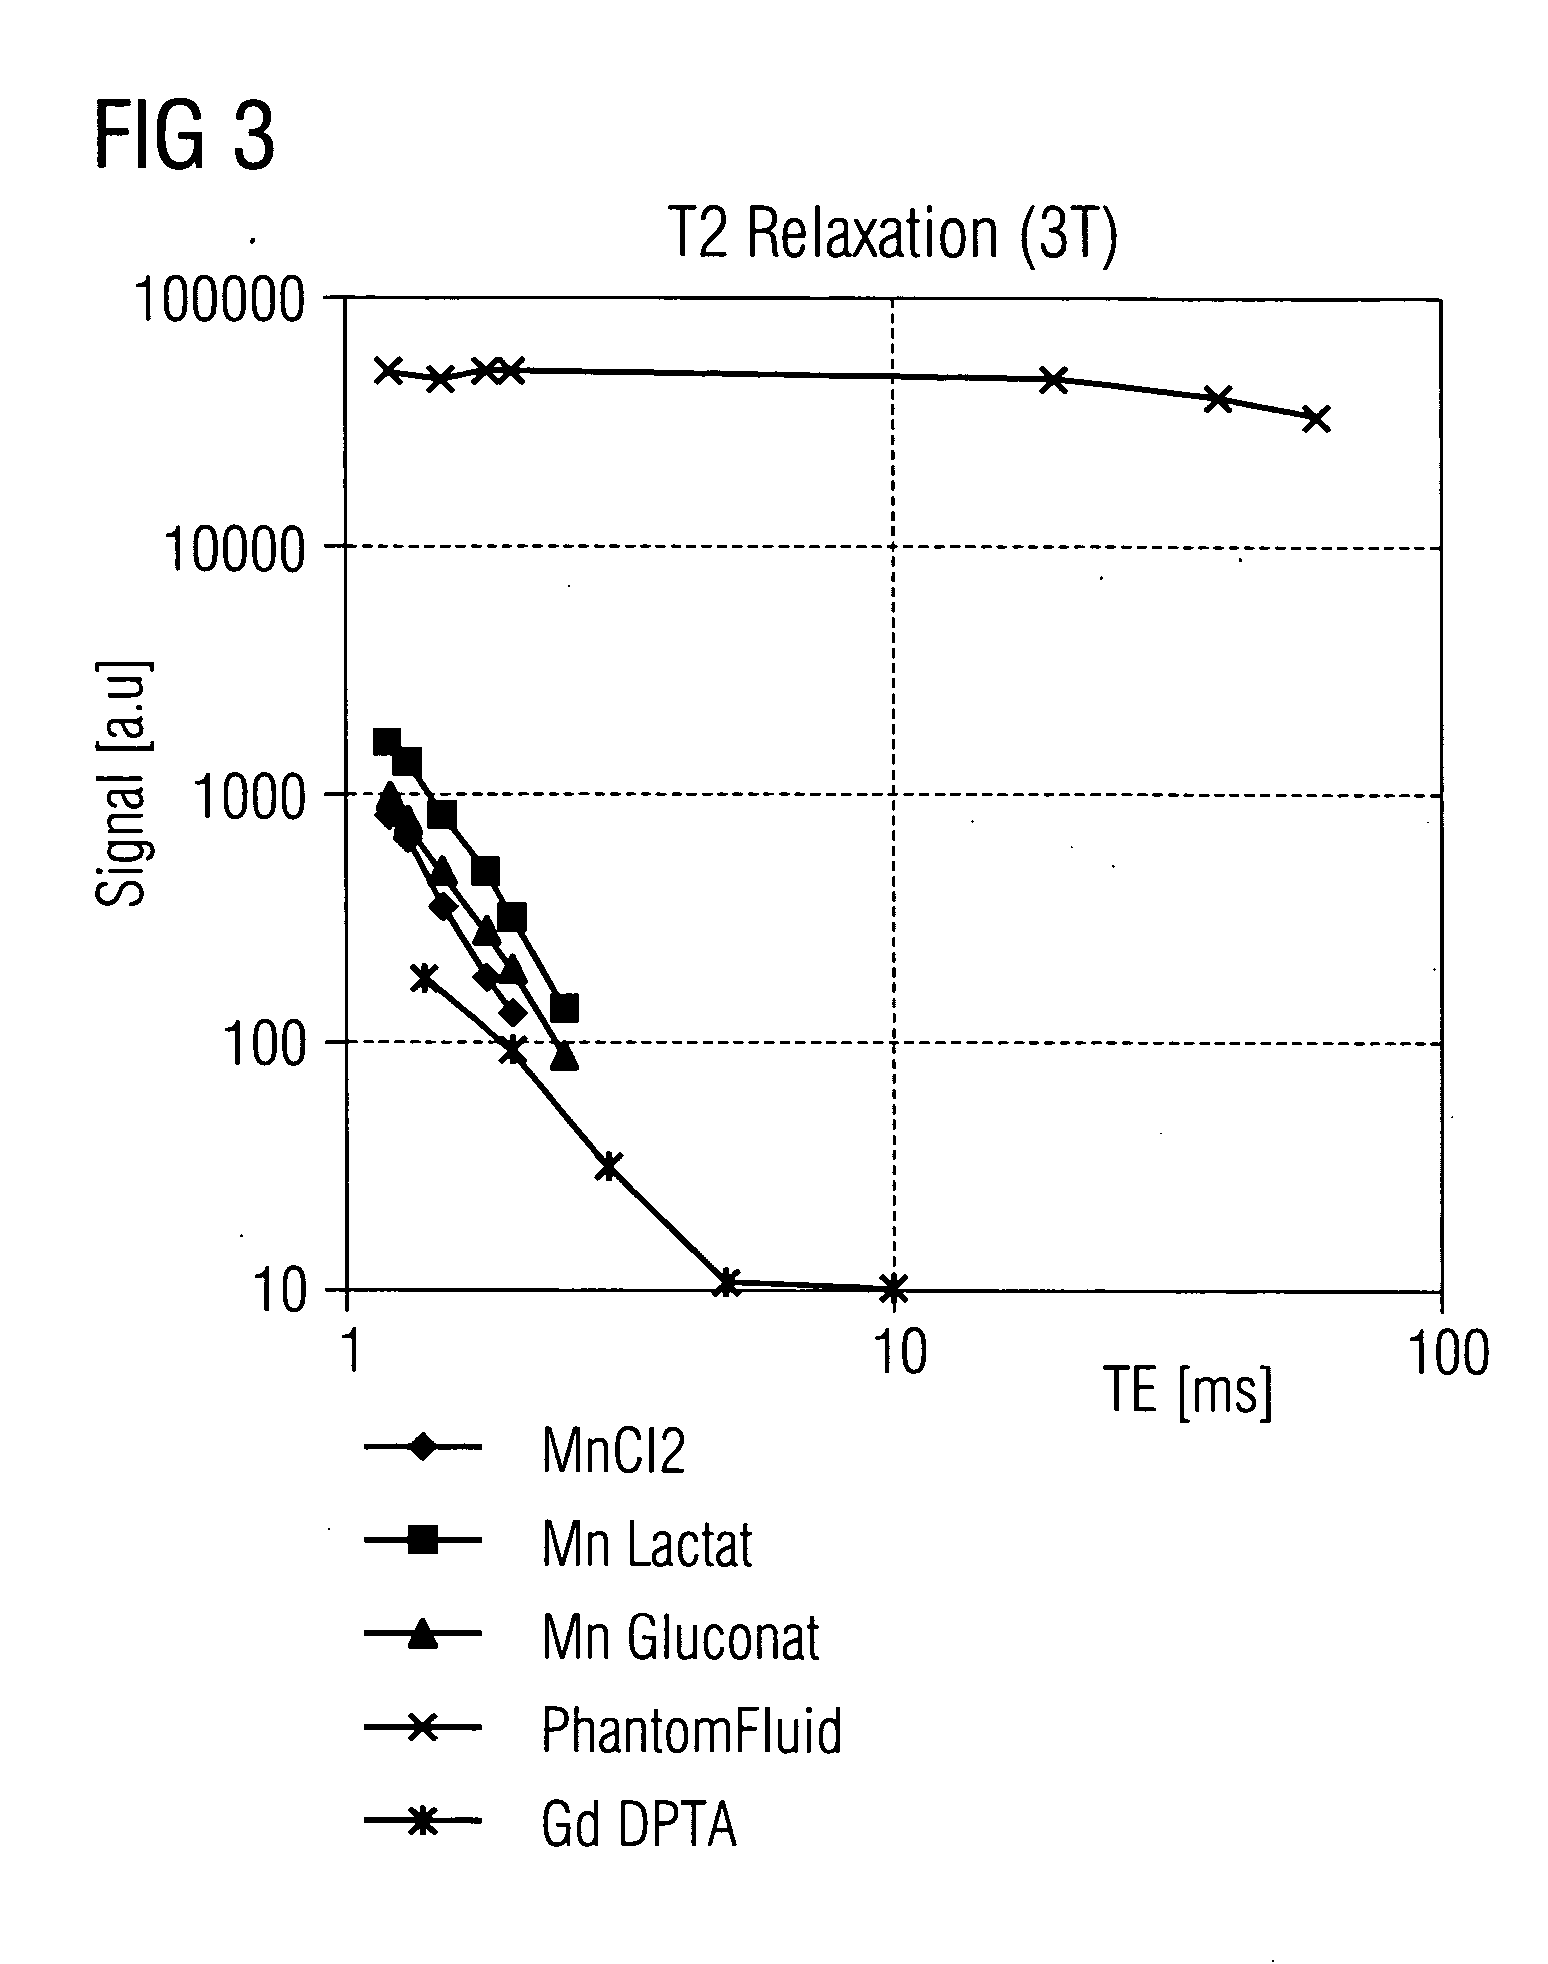 Water-soluble paramagnetic substance for reducing the relaxation time of a coolant and corresponding method